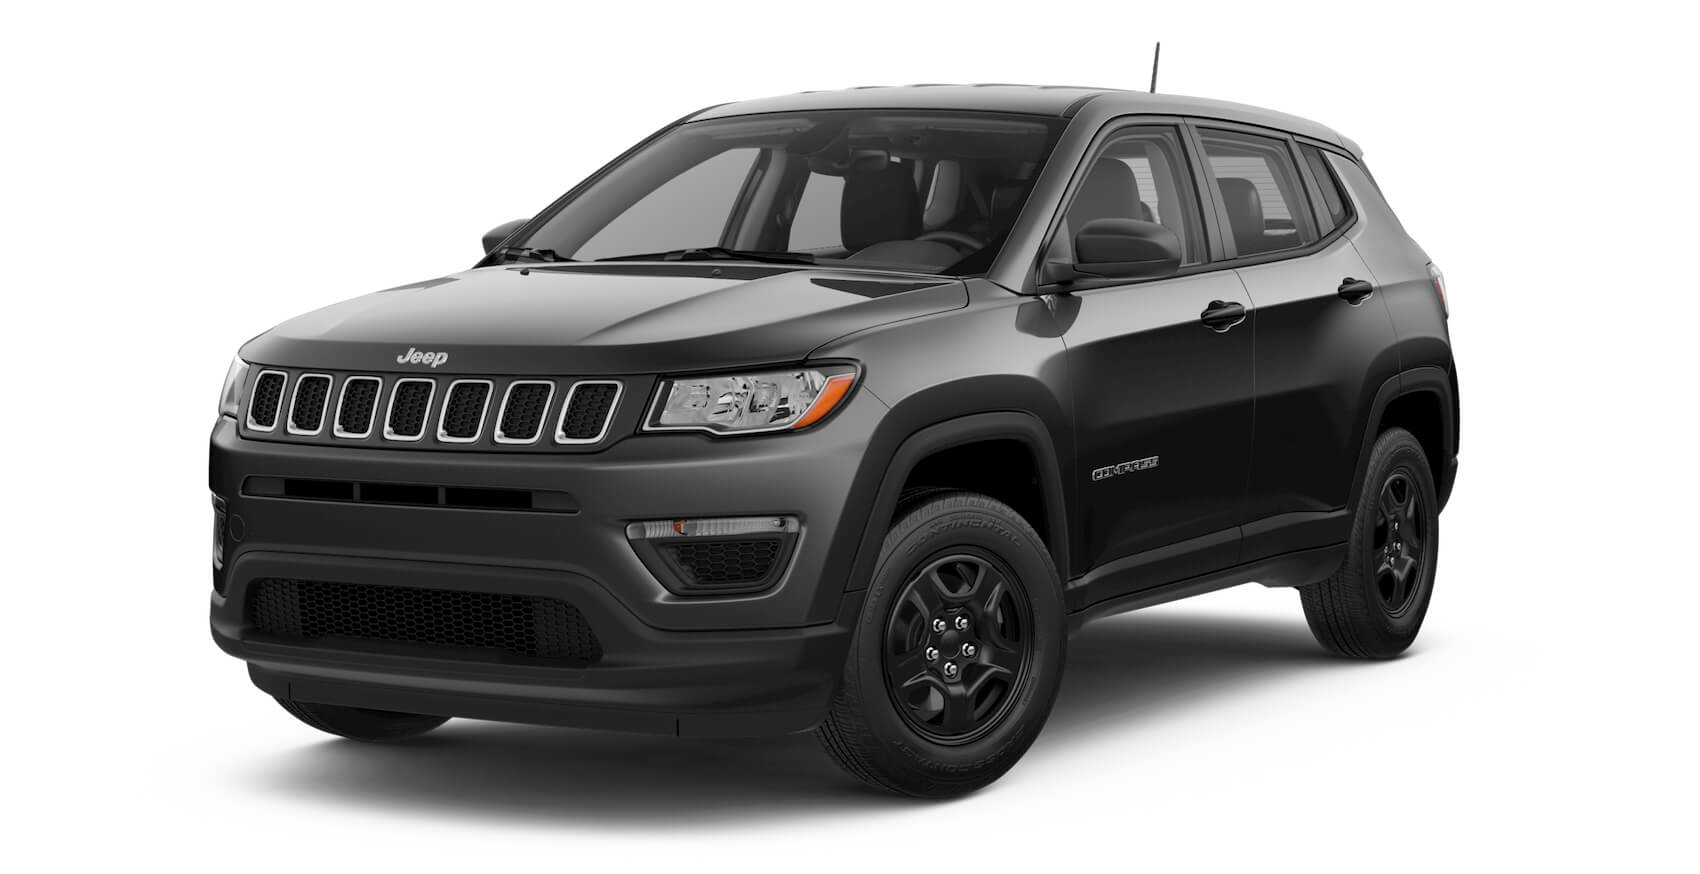 2020 Jeep Compass Jeep Dealer in PA